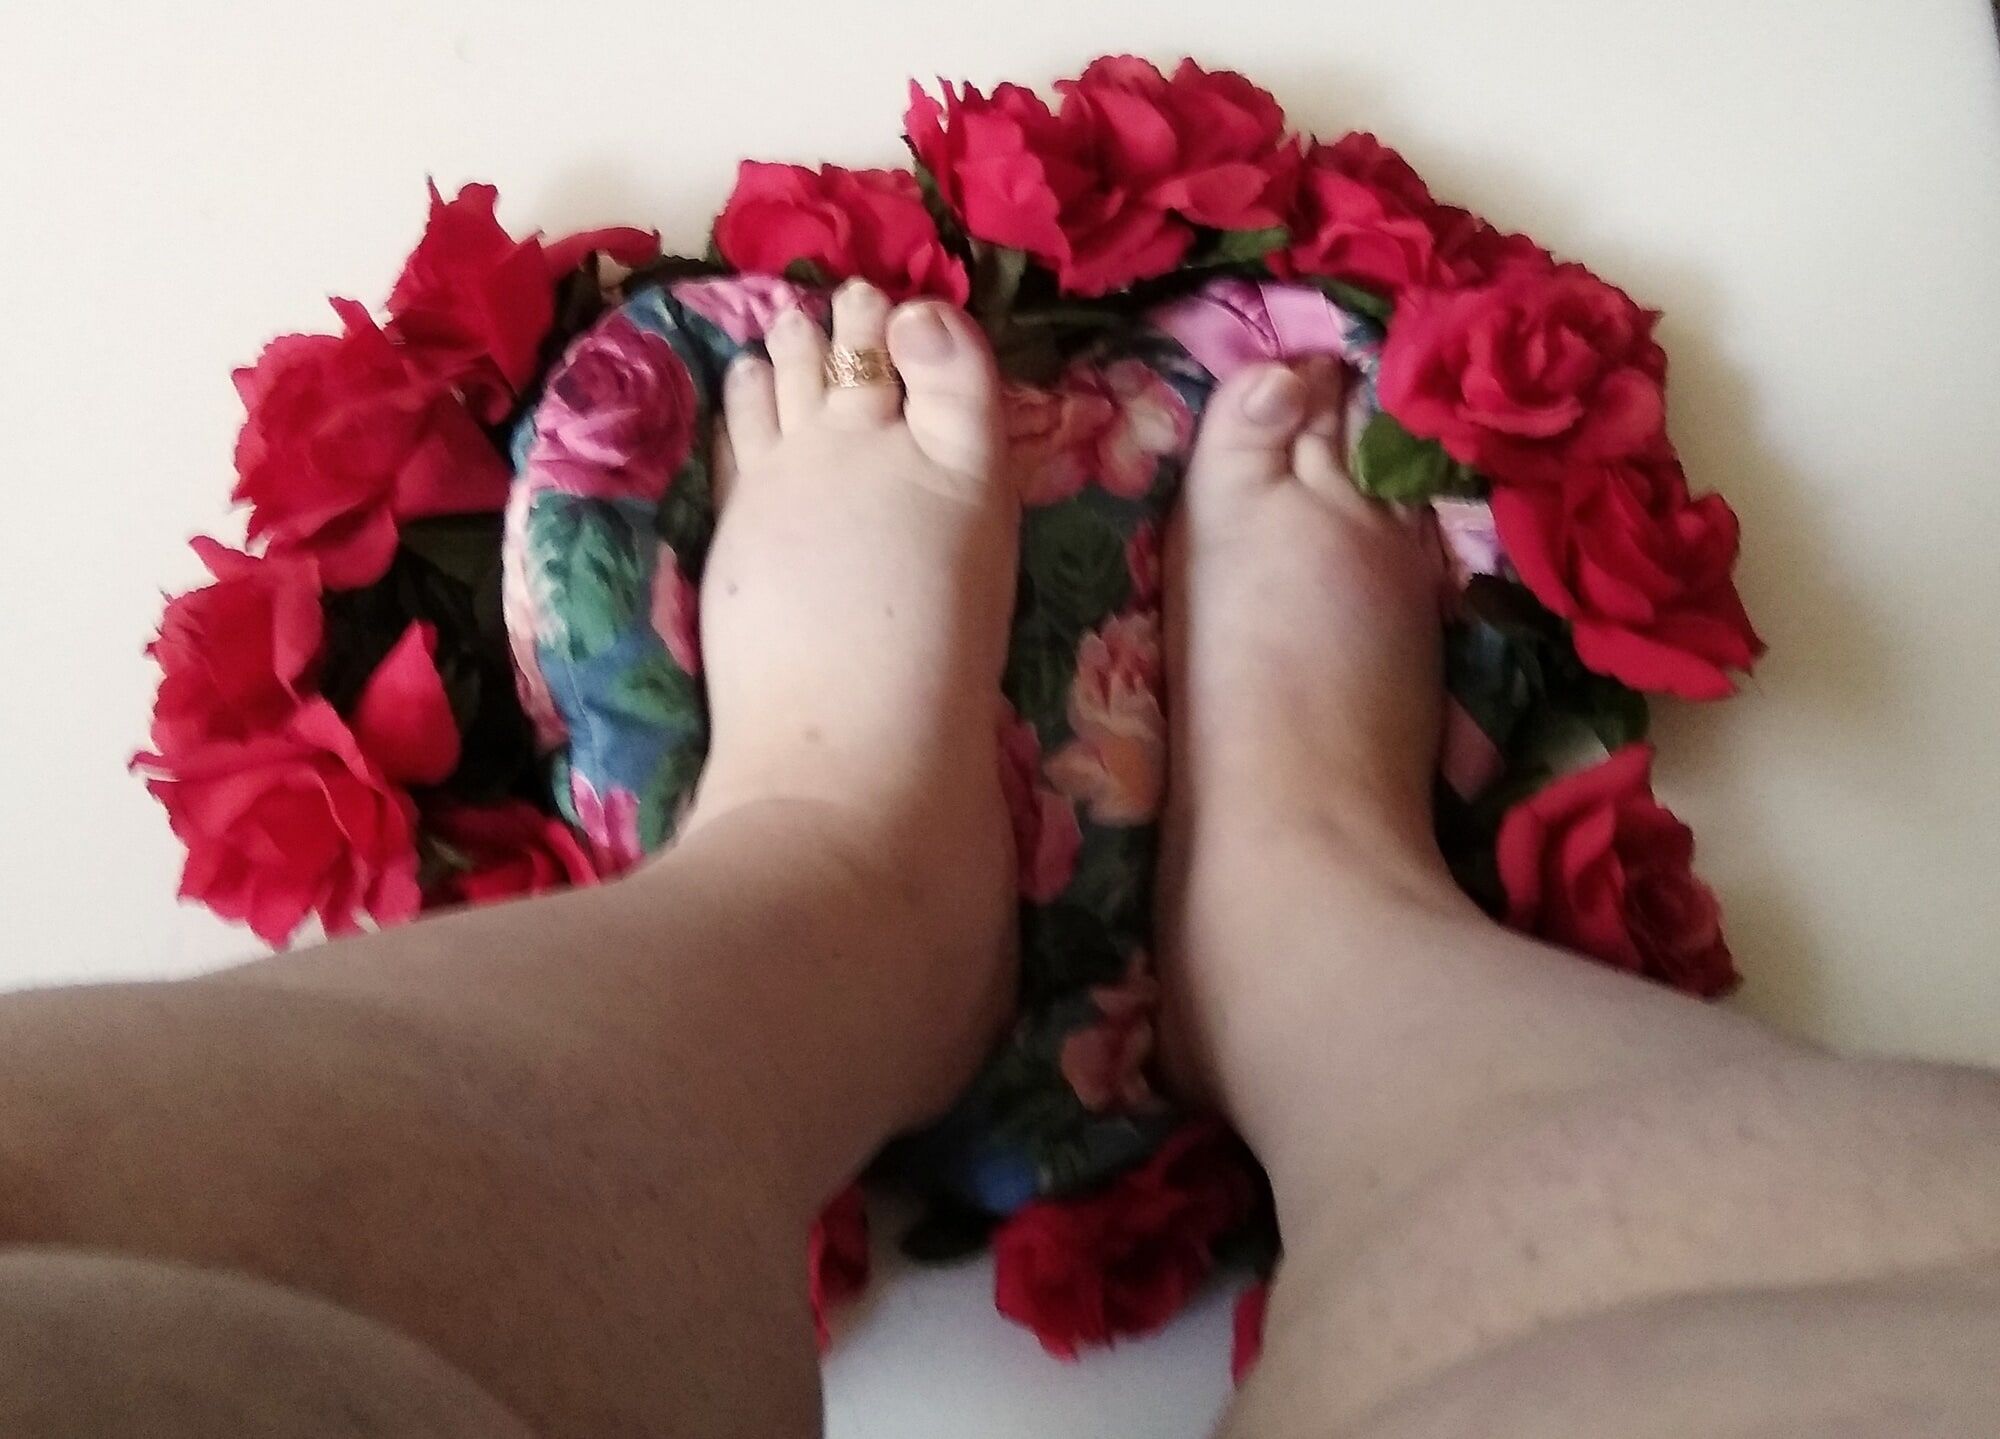 For the foot fetishes #3